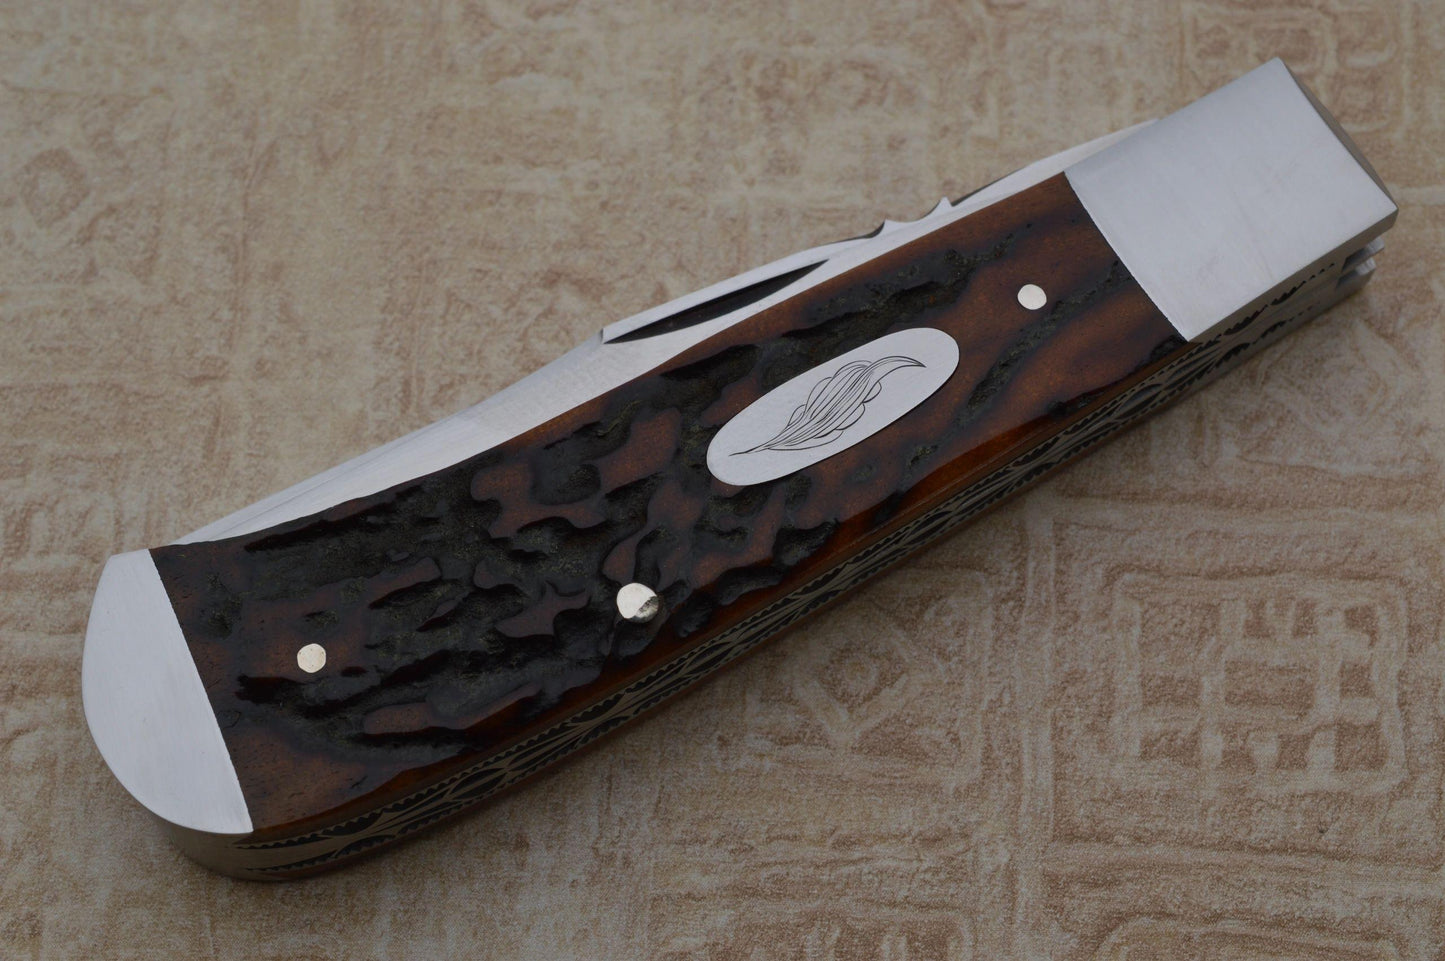 Don Morrow 2-Blade Stag Trapper, Slip-Joint Folding Knife